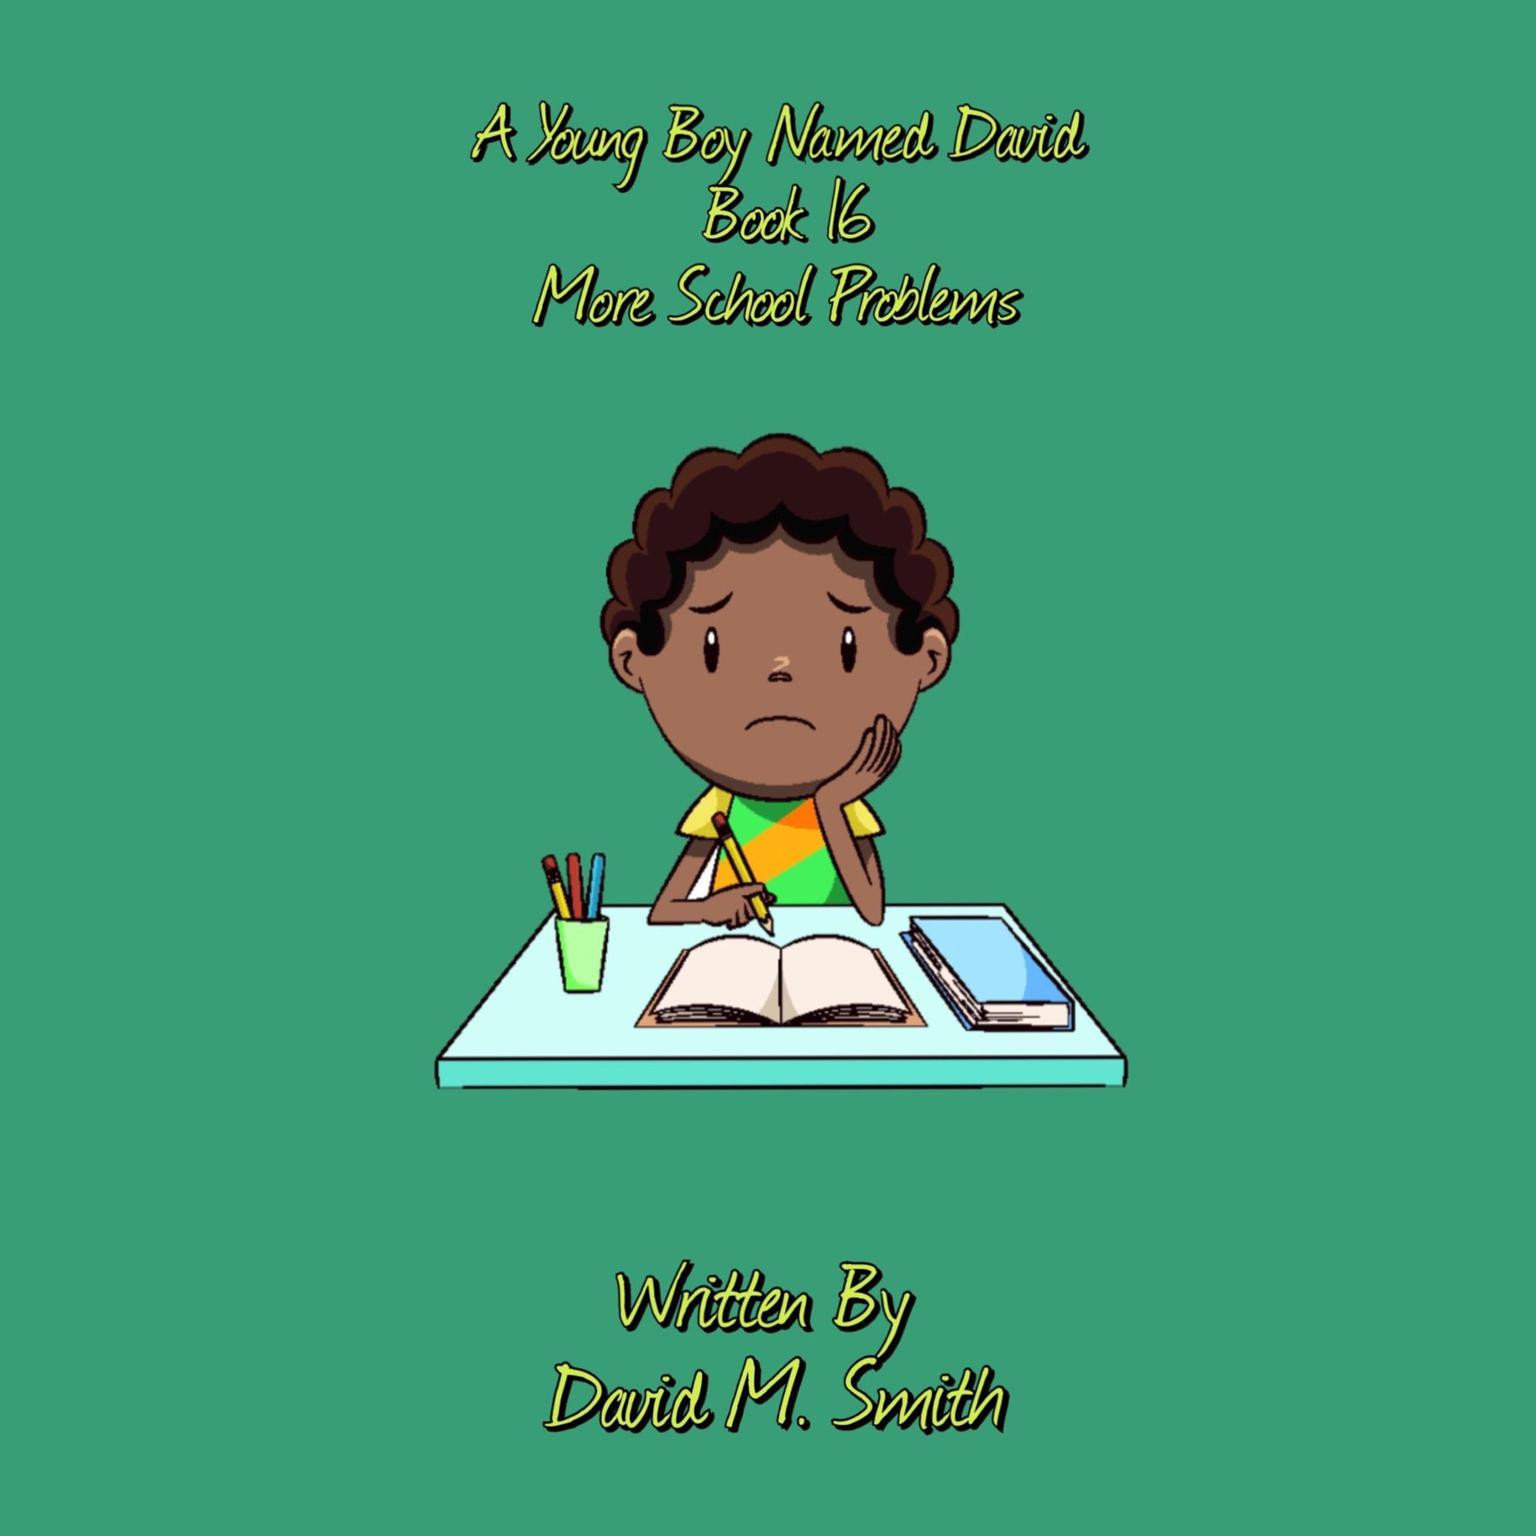 A Young Boy Named David Book 16: More School Problems Audiobook, by David M. Smith